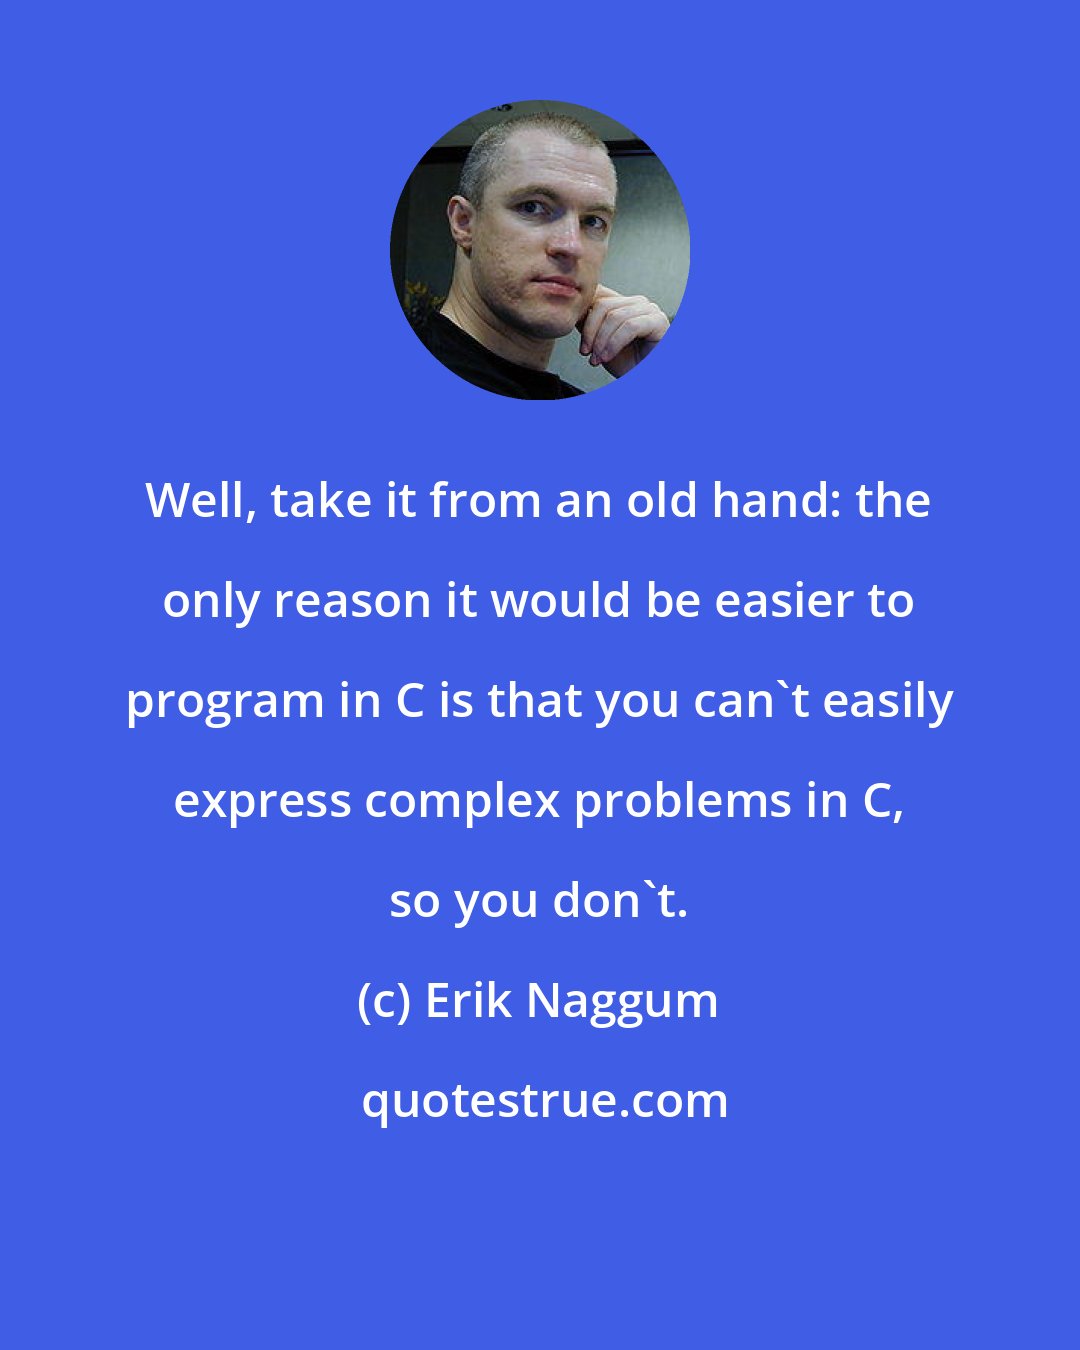 Erik Naggum: Well, take it from an old hand: the only reason it would be easier to program in C is that you can't easily express complex problems in C, so you don't.